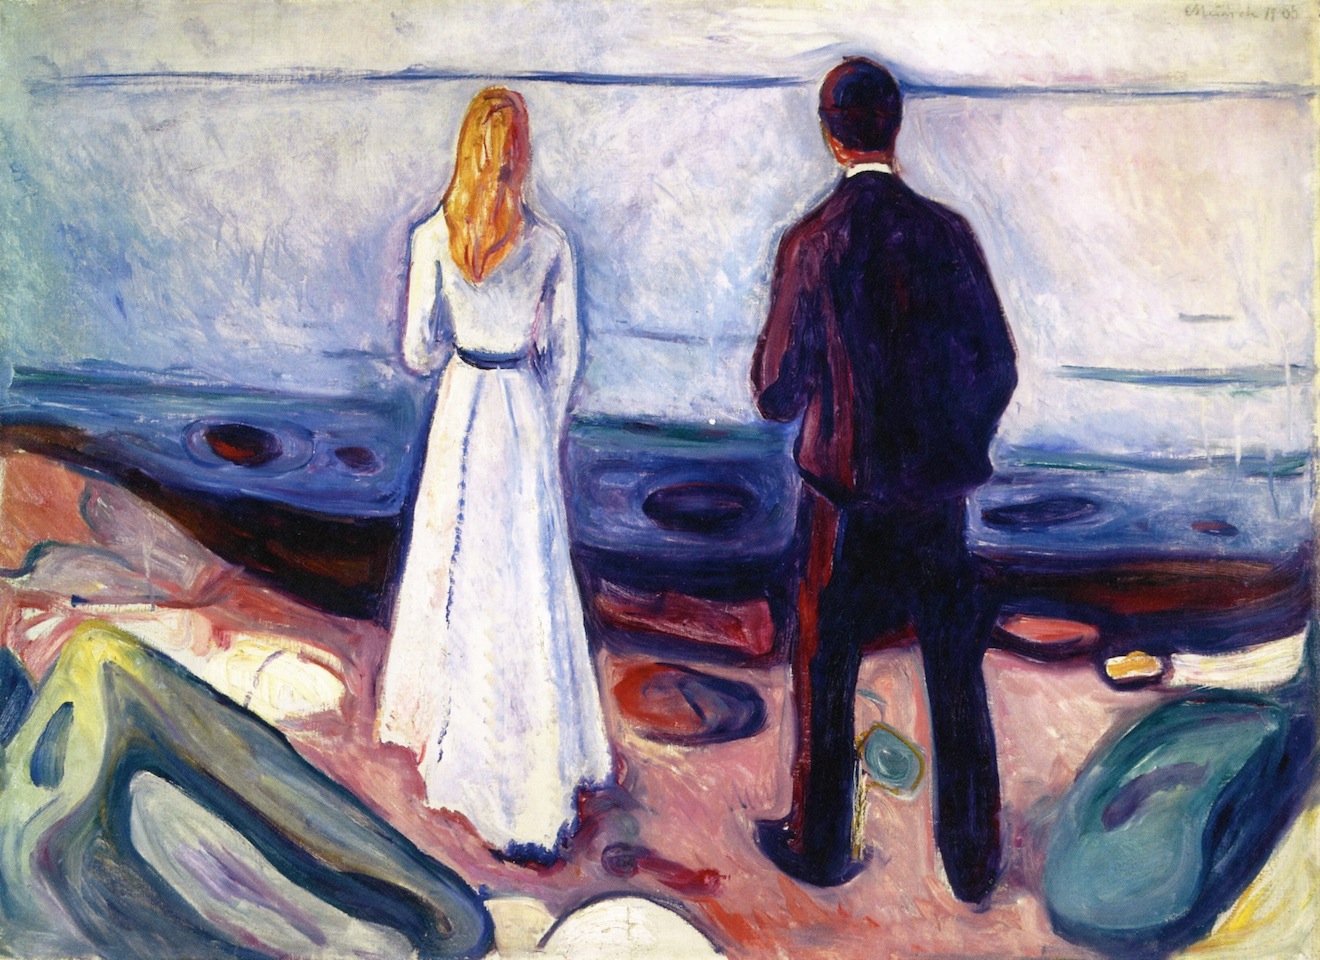 A man and woman standing side-by-side looking out at sea